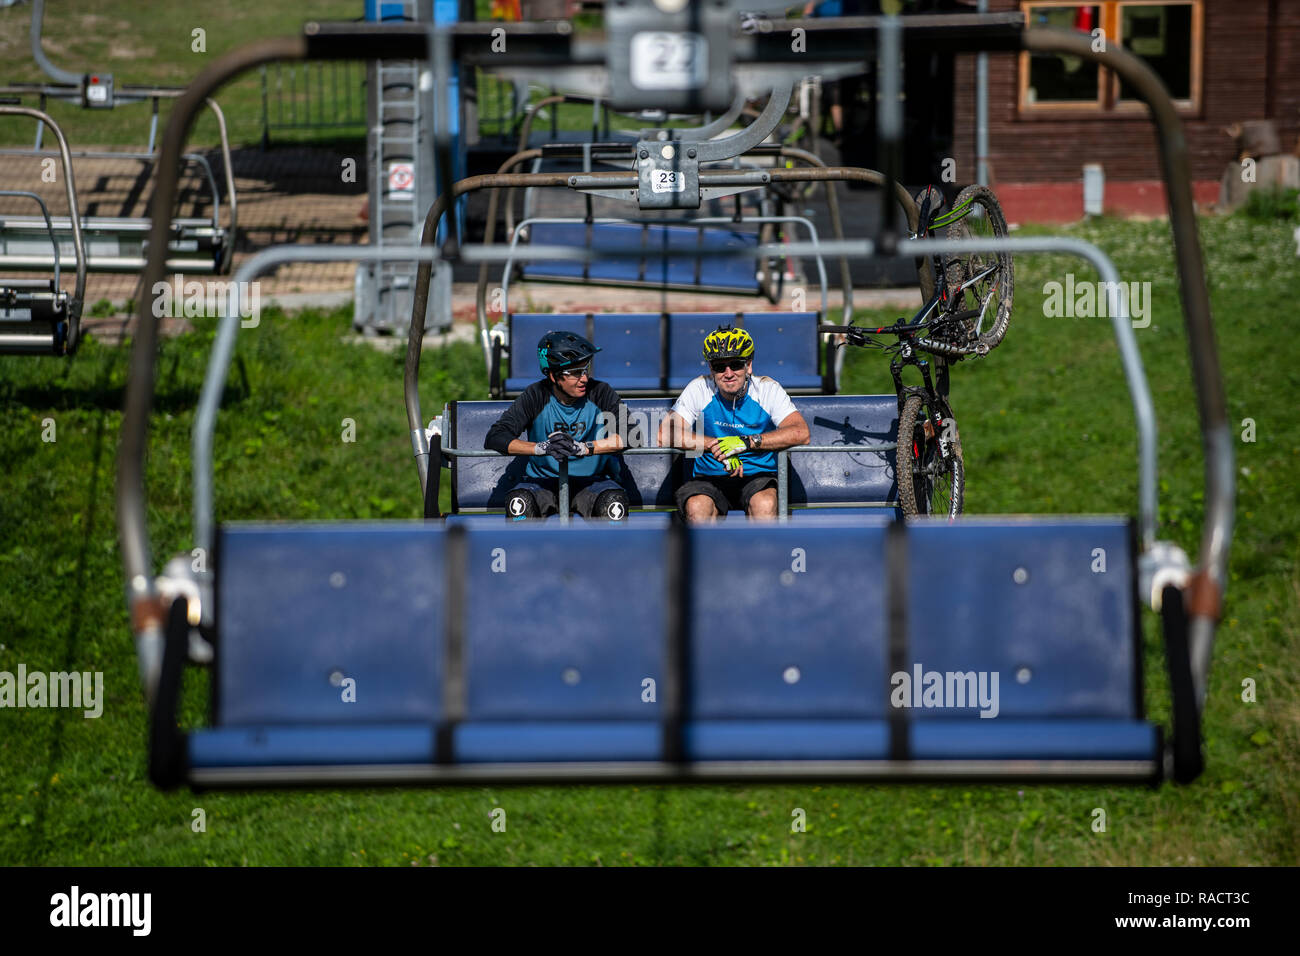 Two men with mountain bikes ride a chairlift at Malinô Brdo bike park near Ružomberok in Slovakia. Stock Photo